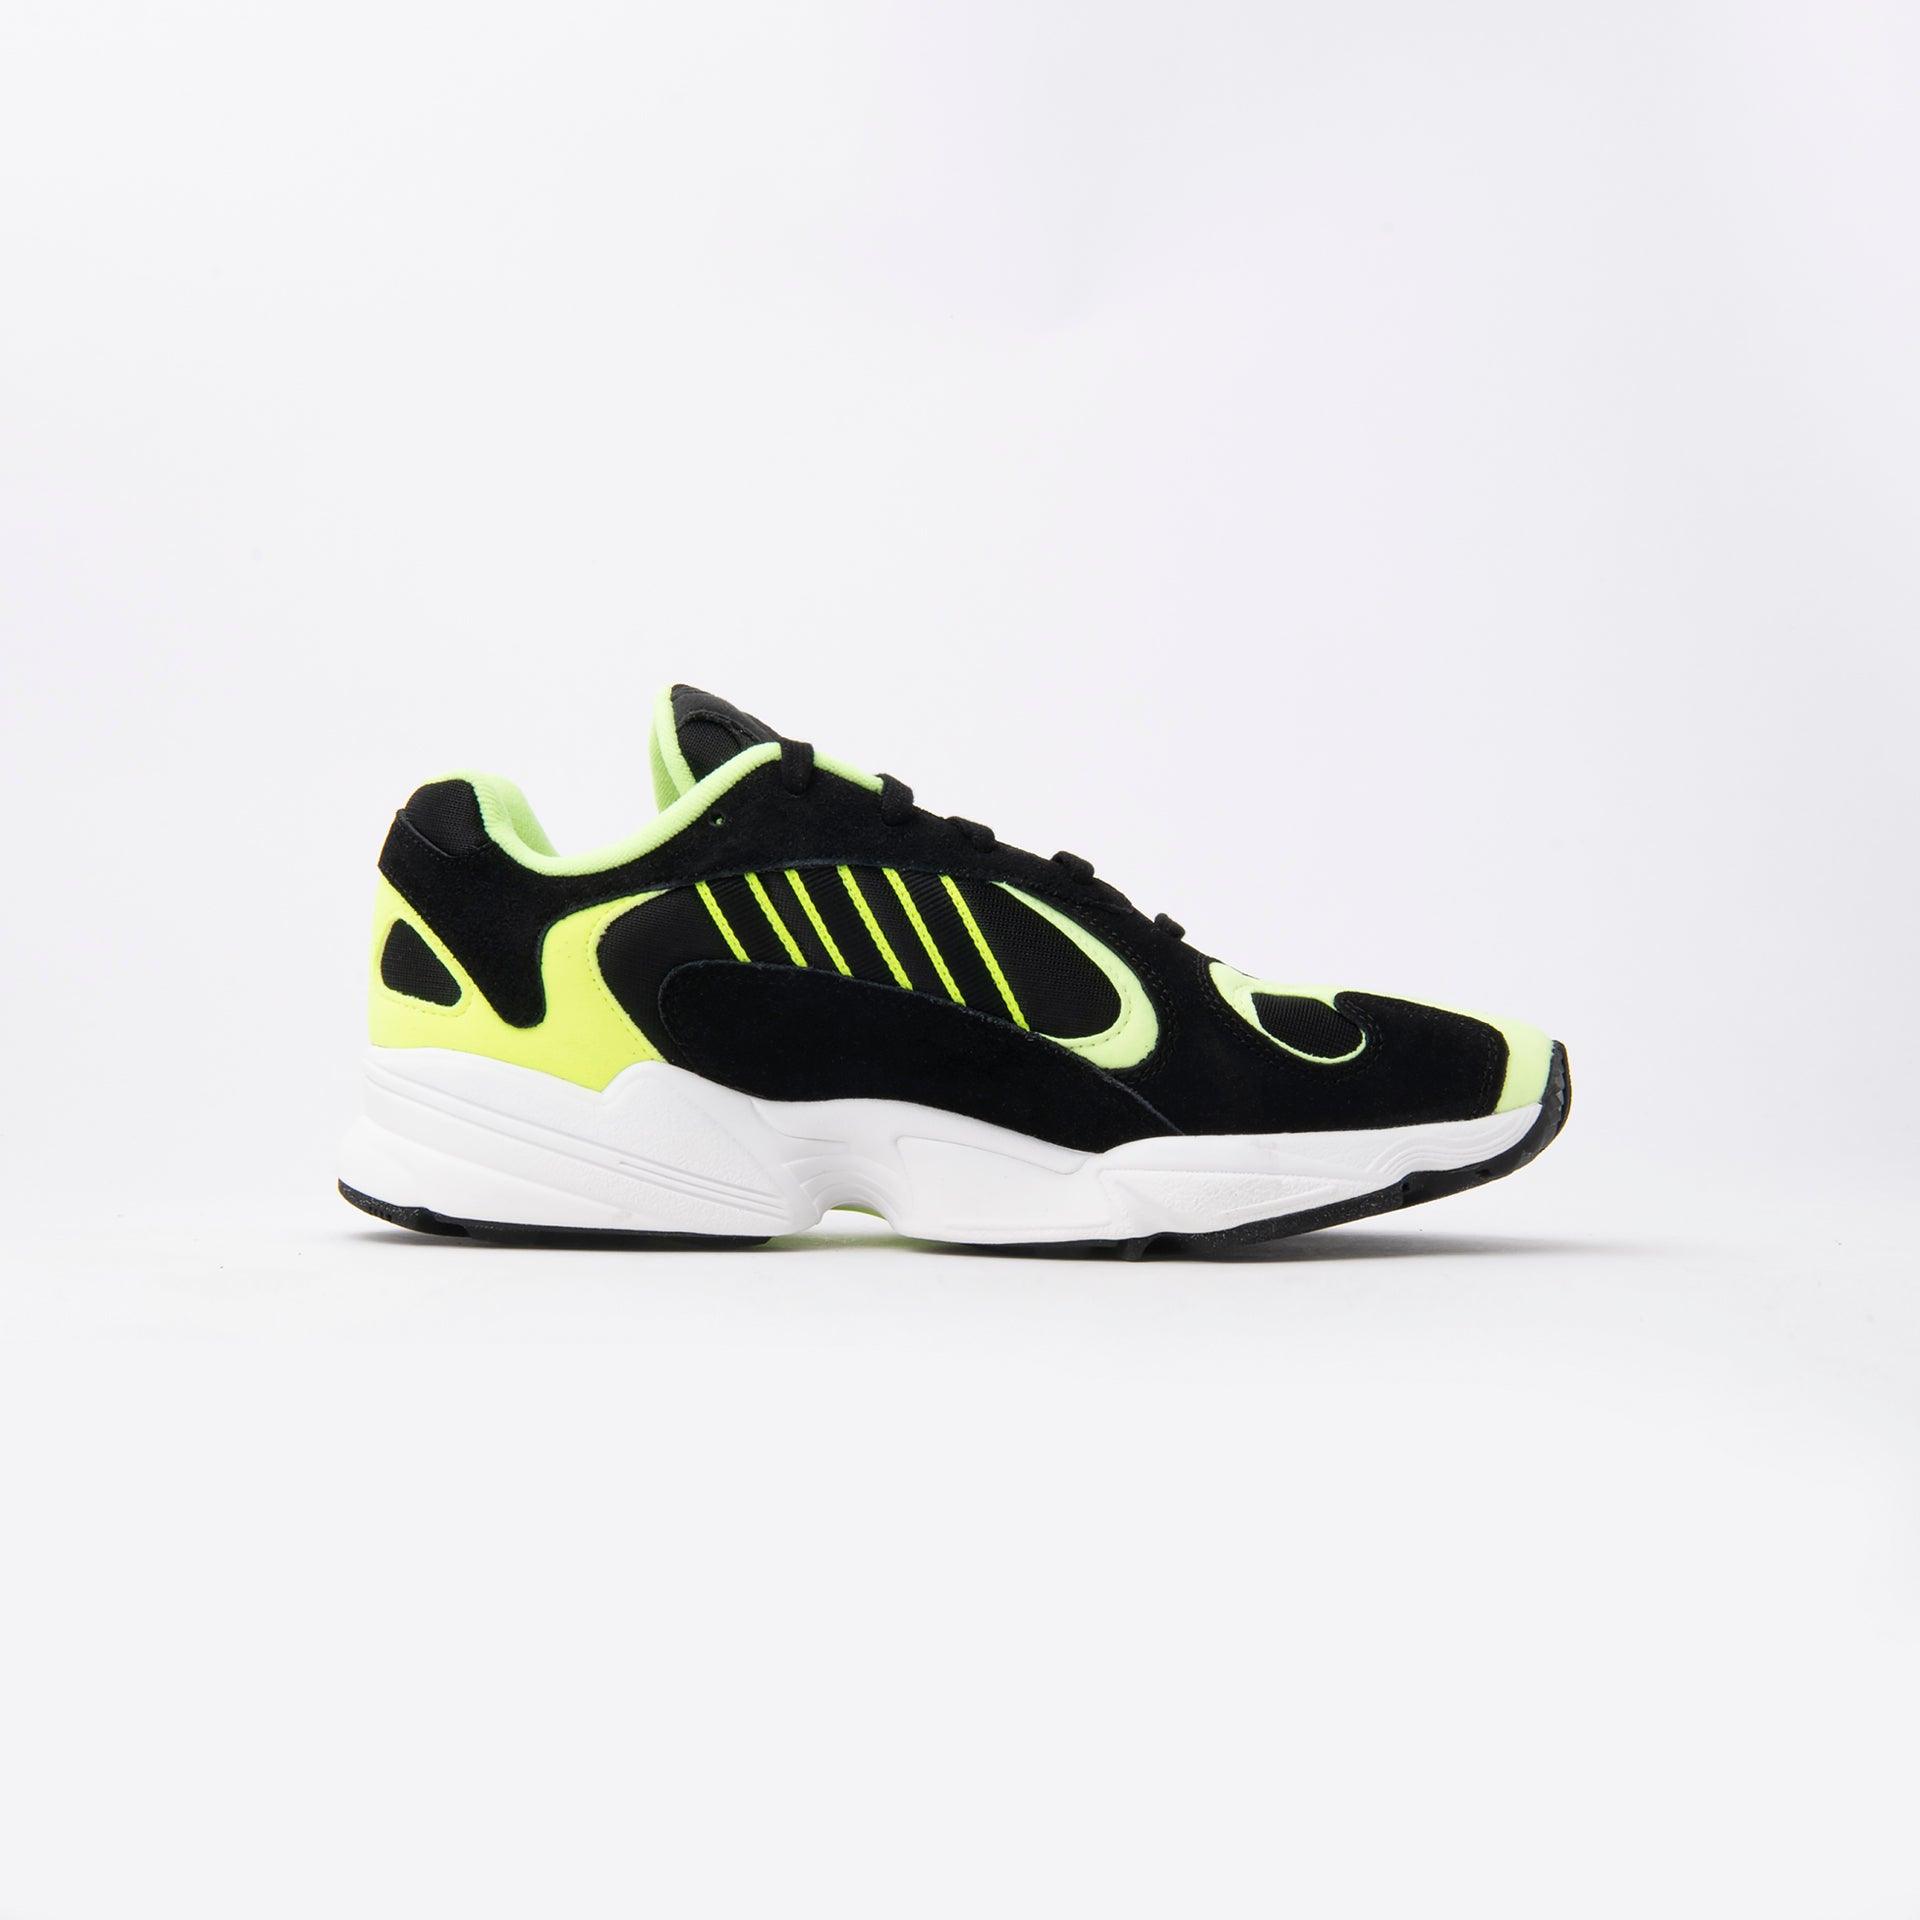 Hireye Yung-1 Sneakers From Adidas - WECRE8